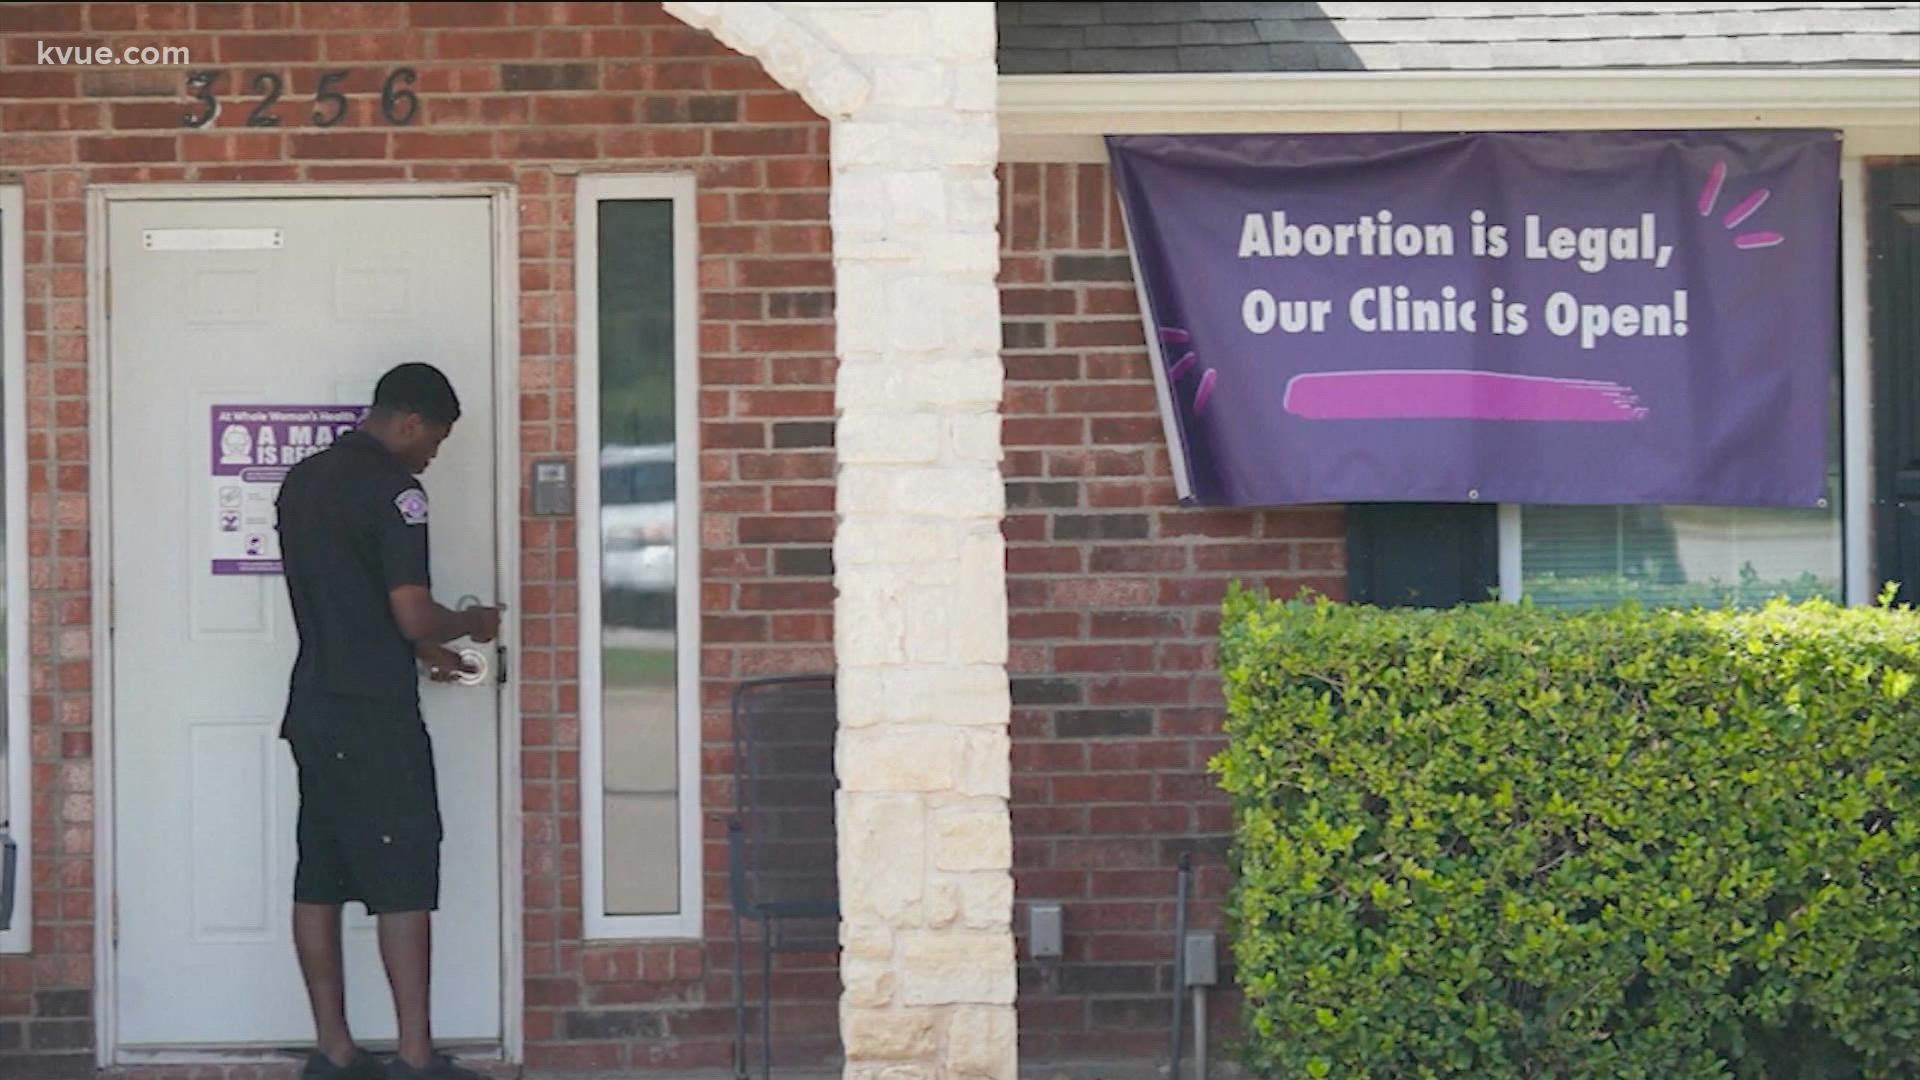 A judge Friday granted a temporary restraining order filed by Texas affiliates of Planned Parenthood and other organizations against Texas Right to Life.